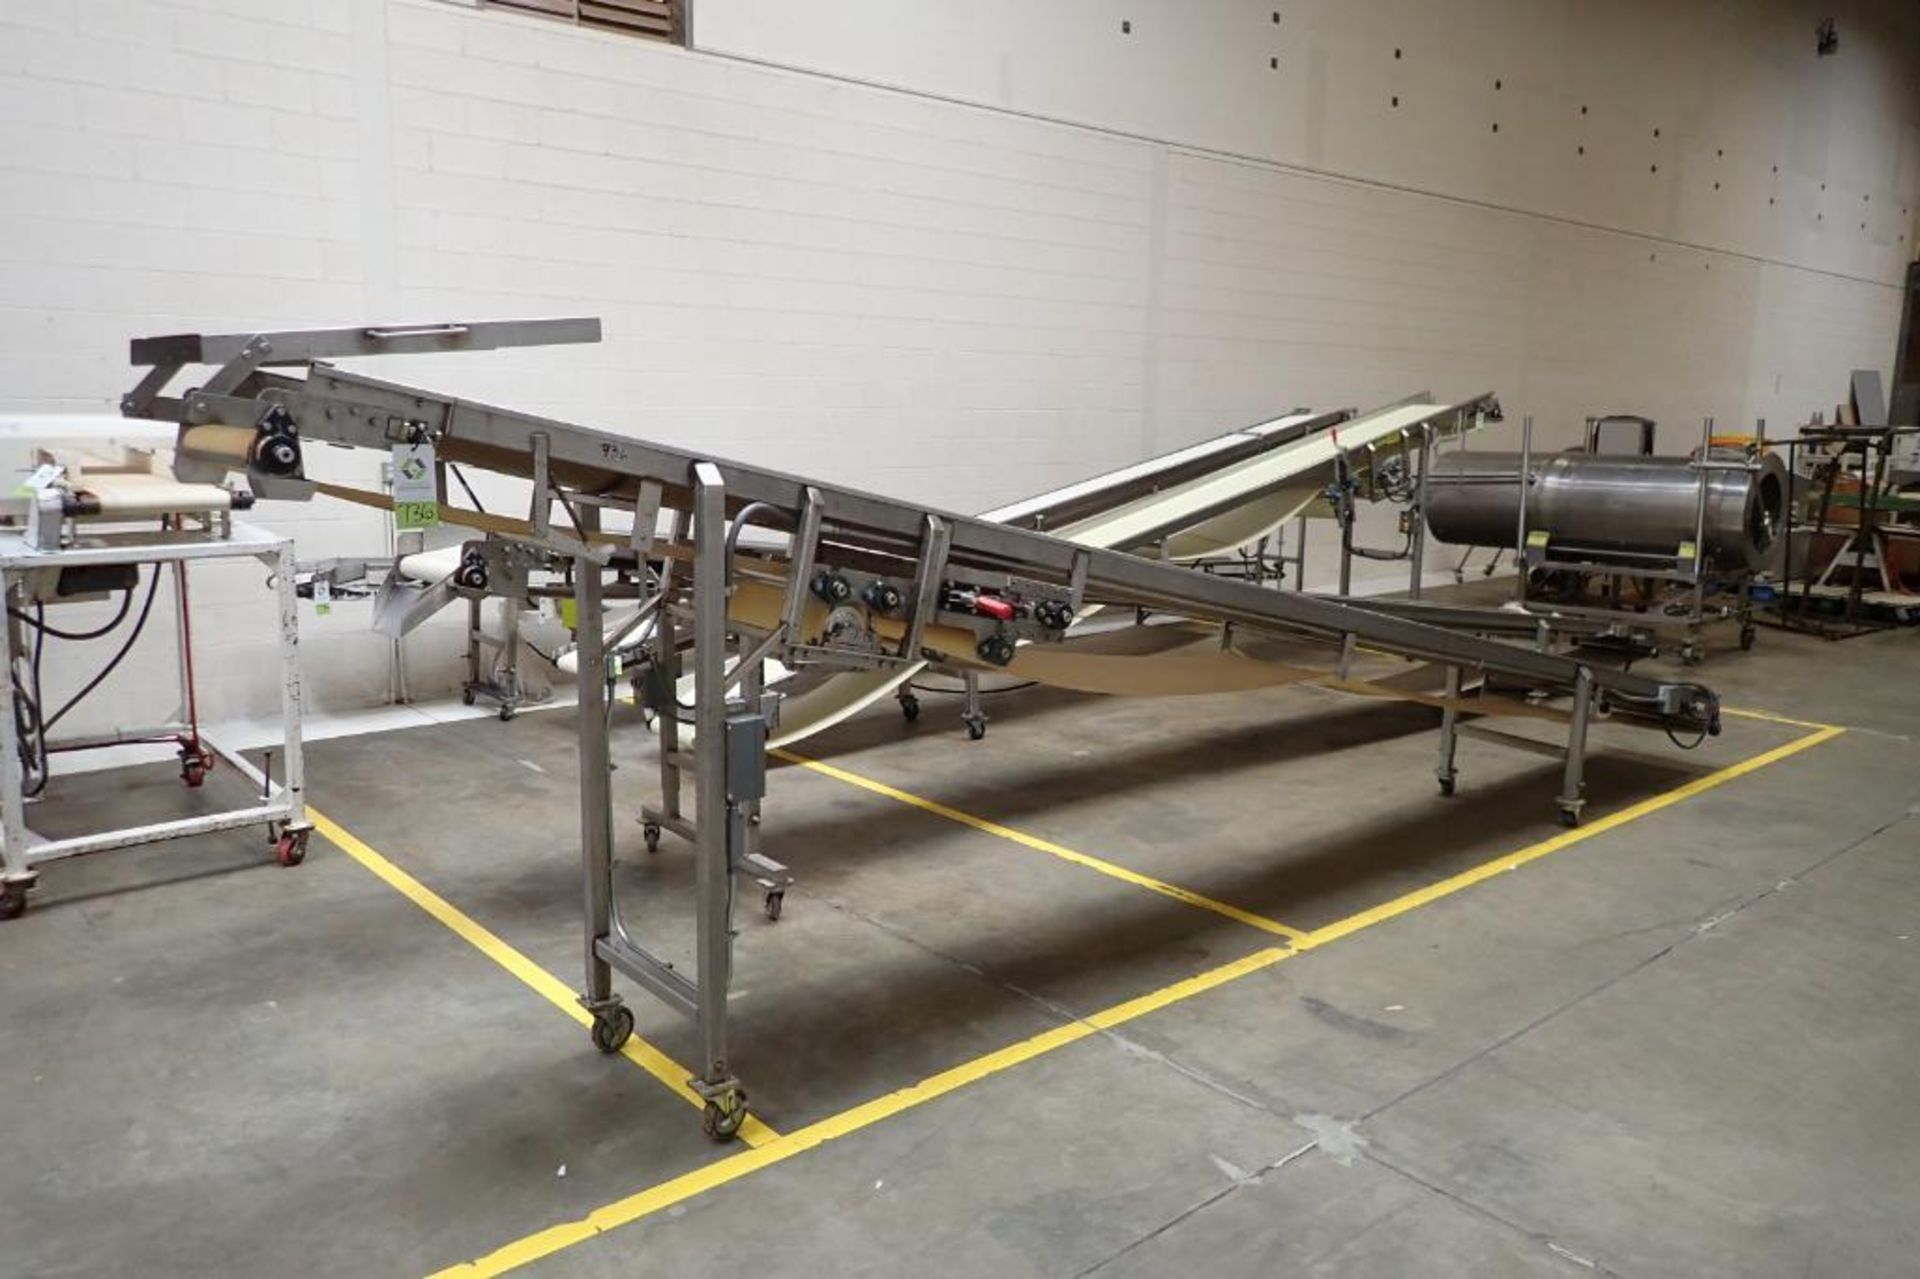 SS belt incline conveyor, 260 in. long x 18 in. wide, 70 in. discharge height, drum drive, on wheels